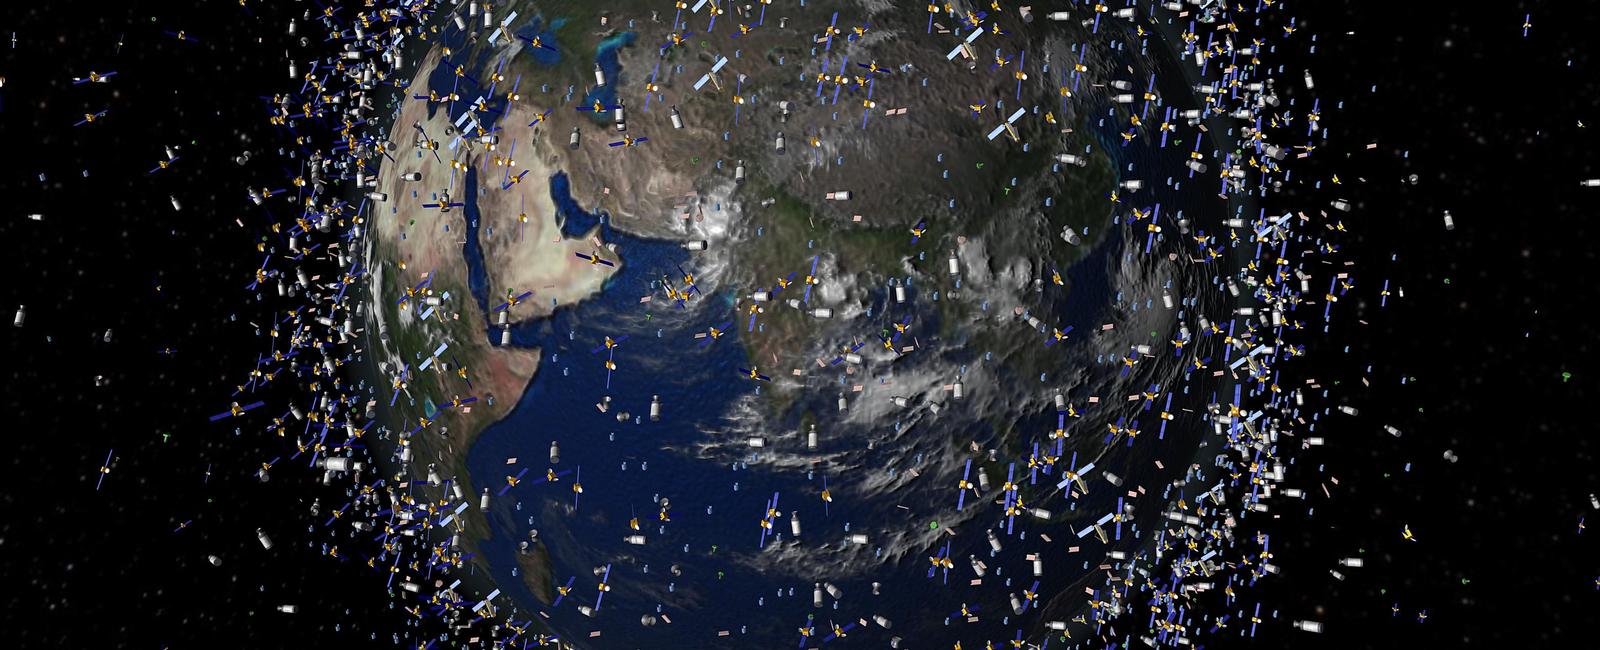 2 000 pounds of space dust and other space debris fall on the earth every day